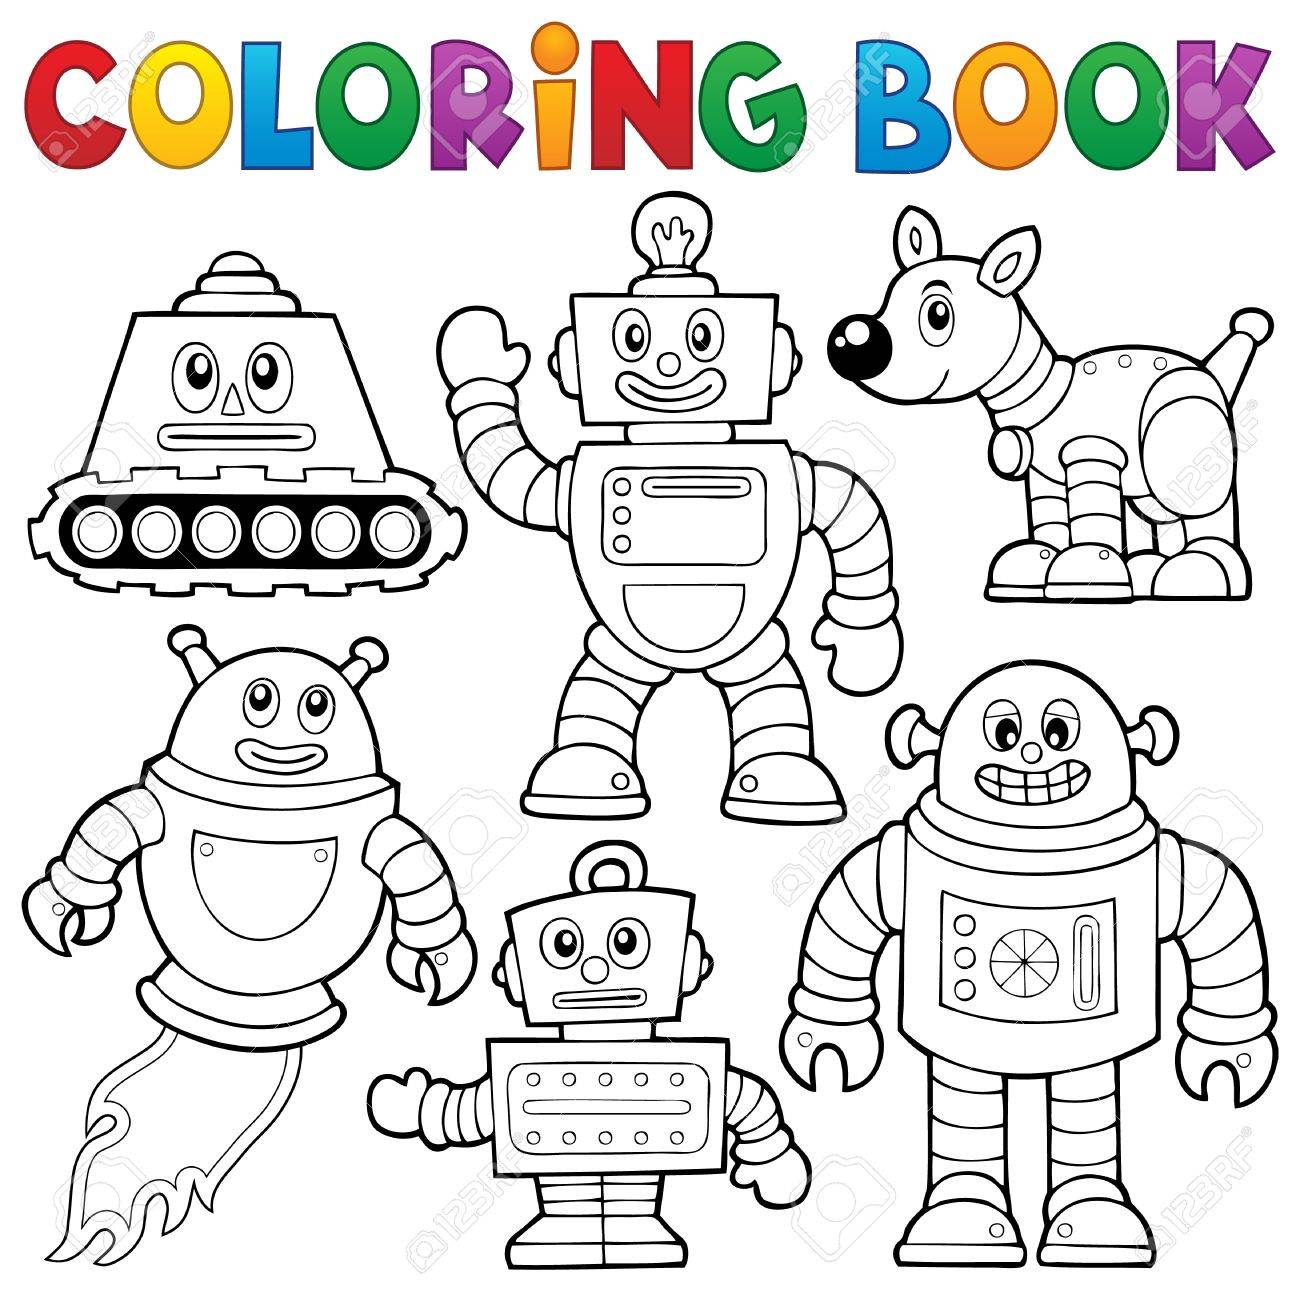 Coloring book robot collection royalty free svg cliparts vectors and stock illustration image